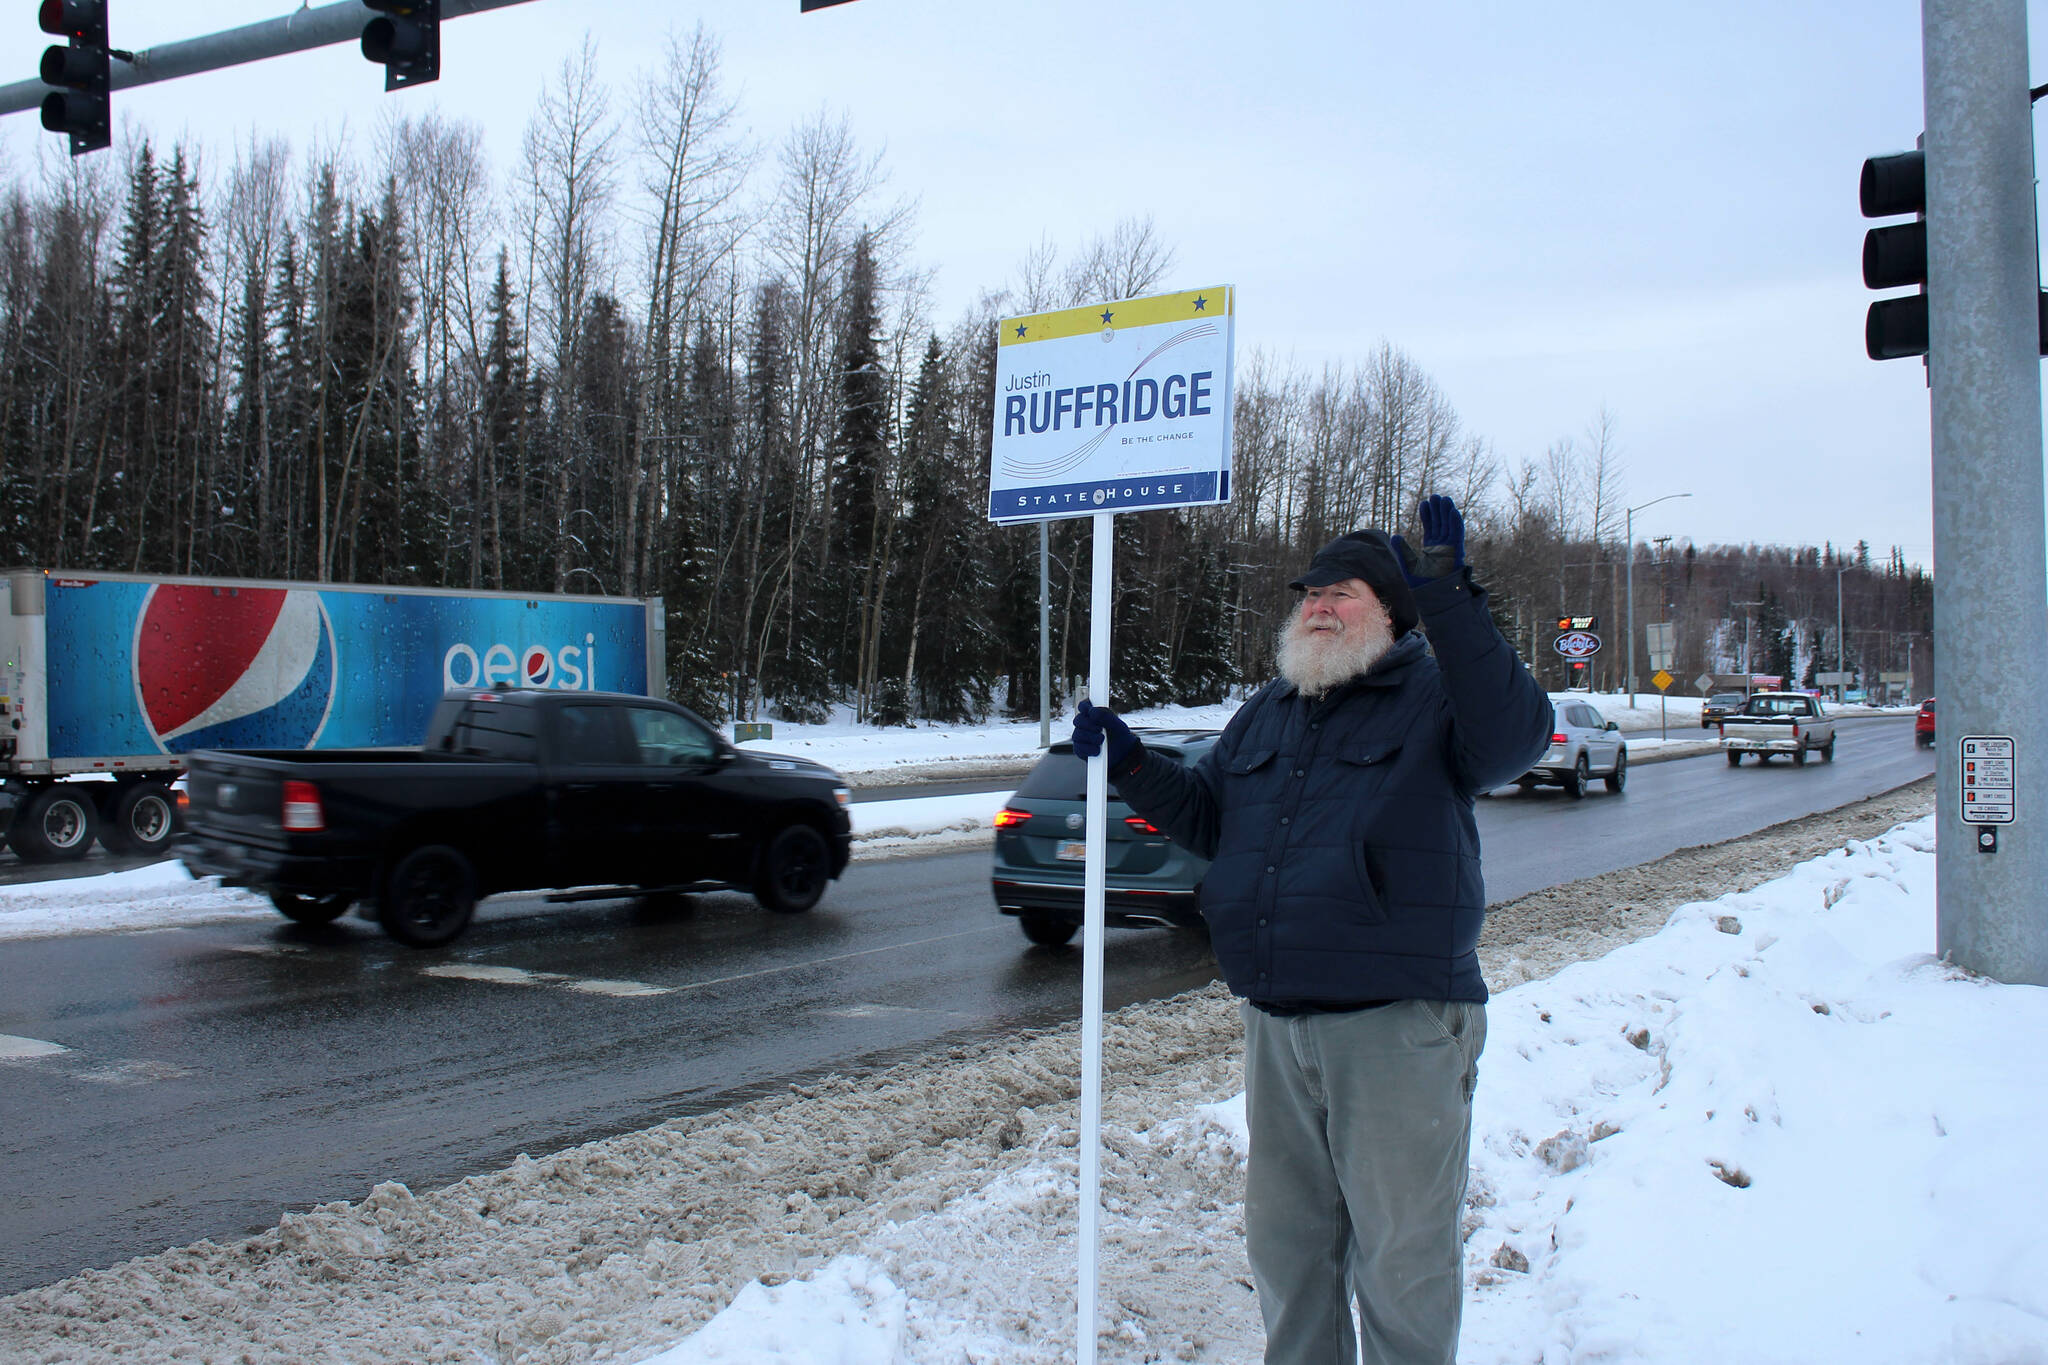 Larry Opperman waves a sign in support of Alaska House candidate Justin Ruffridge at the intersection of the Kenai Spur and Sterling highways on Tuesday, Nov. 8, 2022 in Soldotna, Alaska. (Ashlyn O'Hara/Peninsula Clarion)